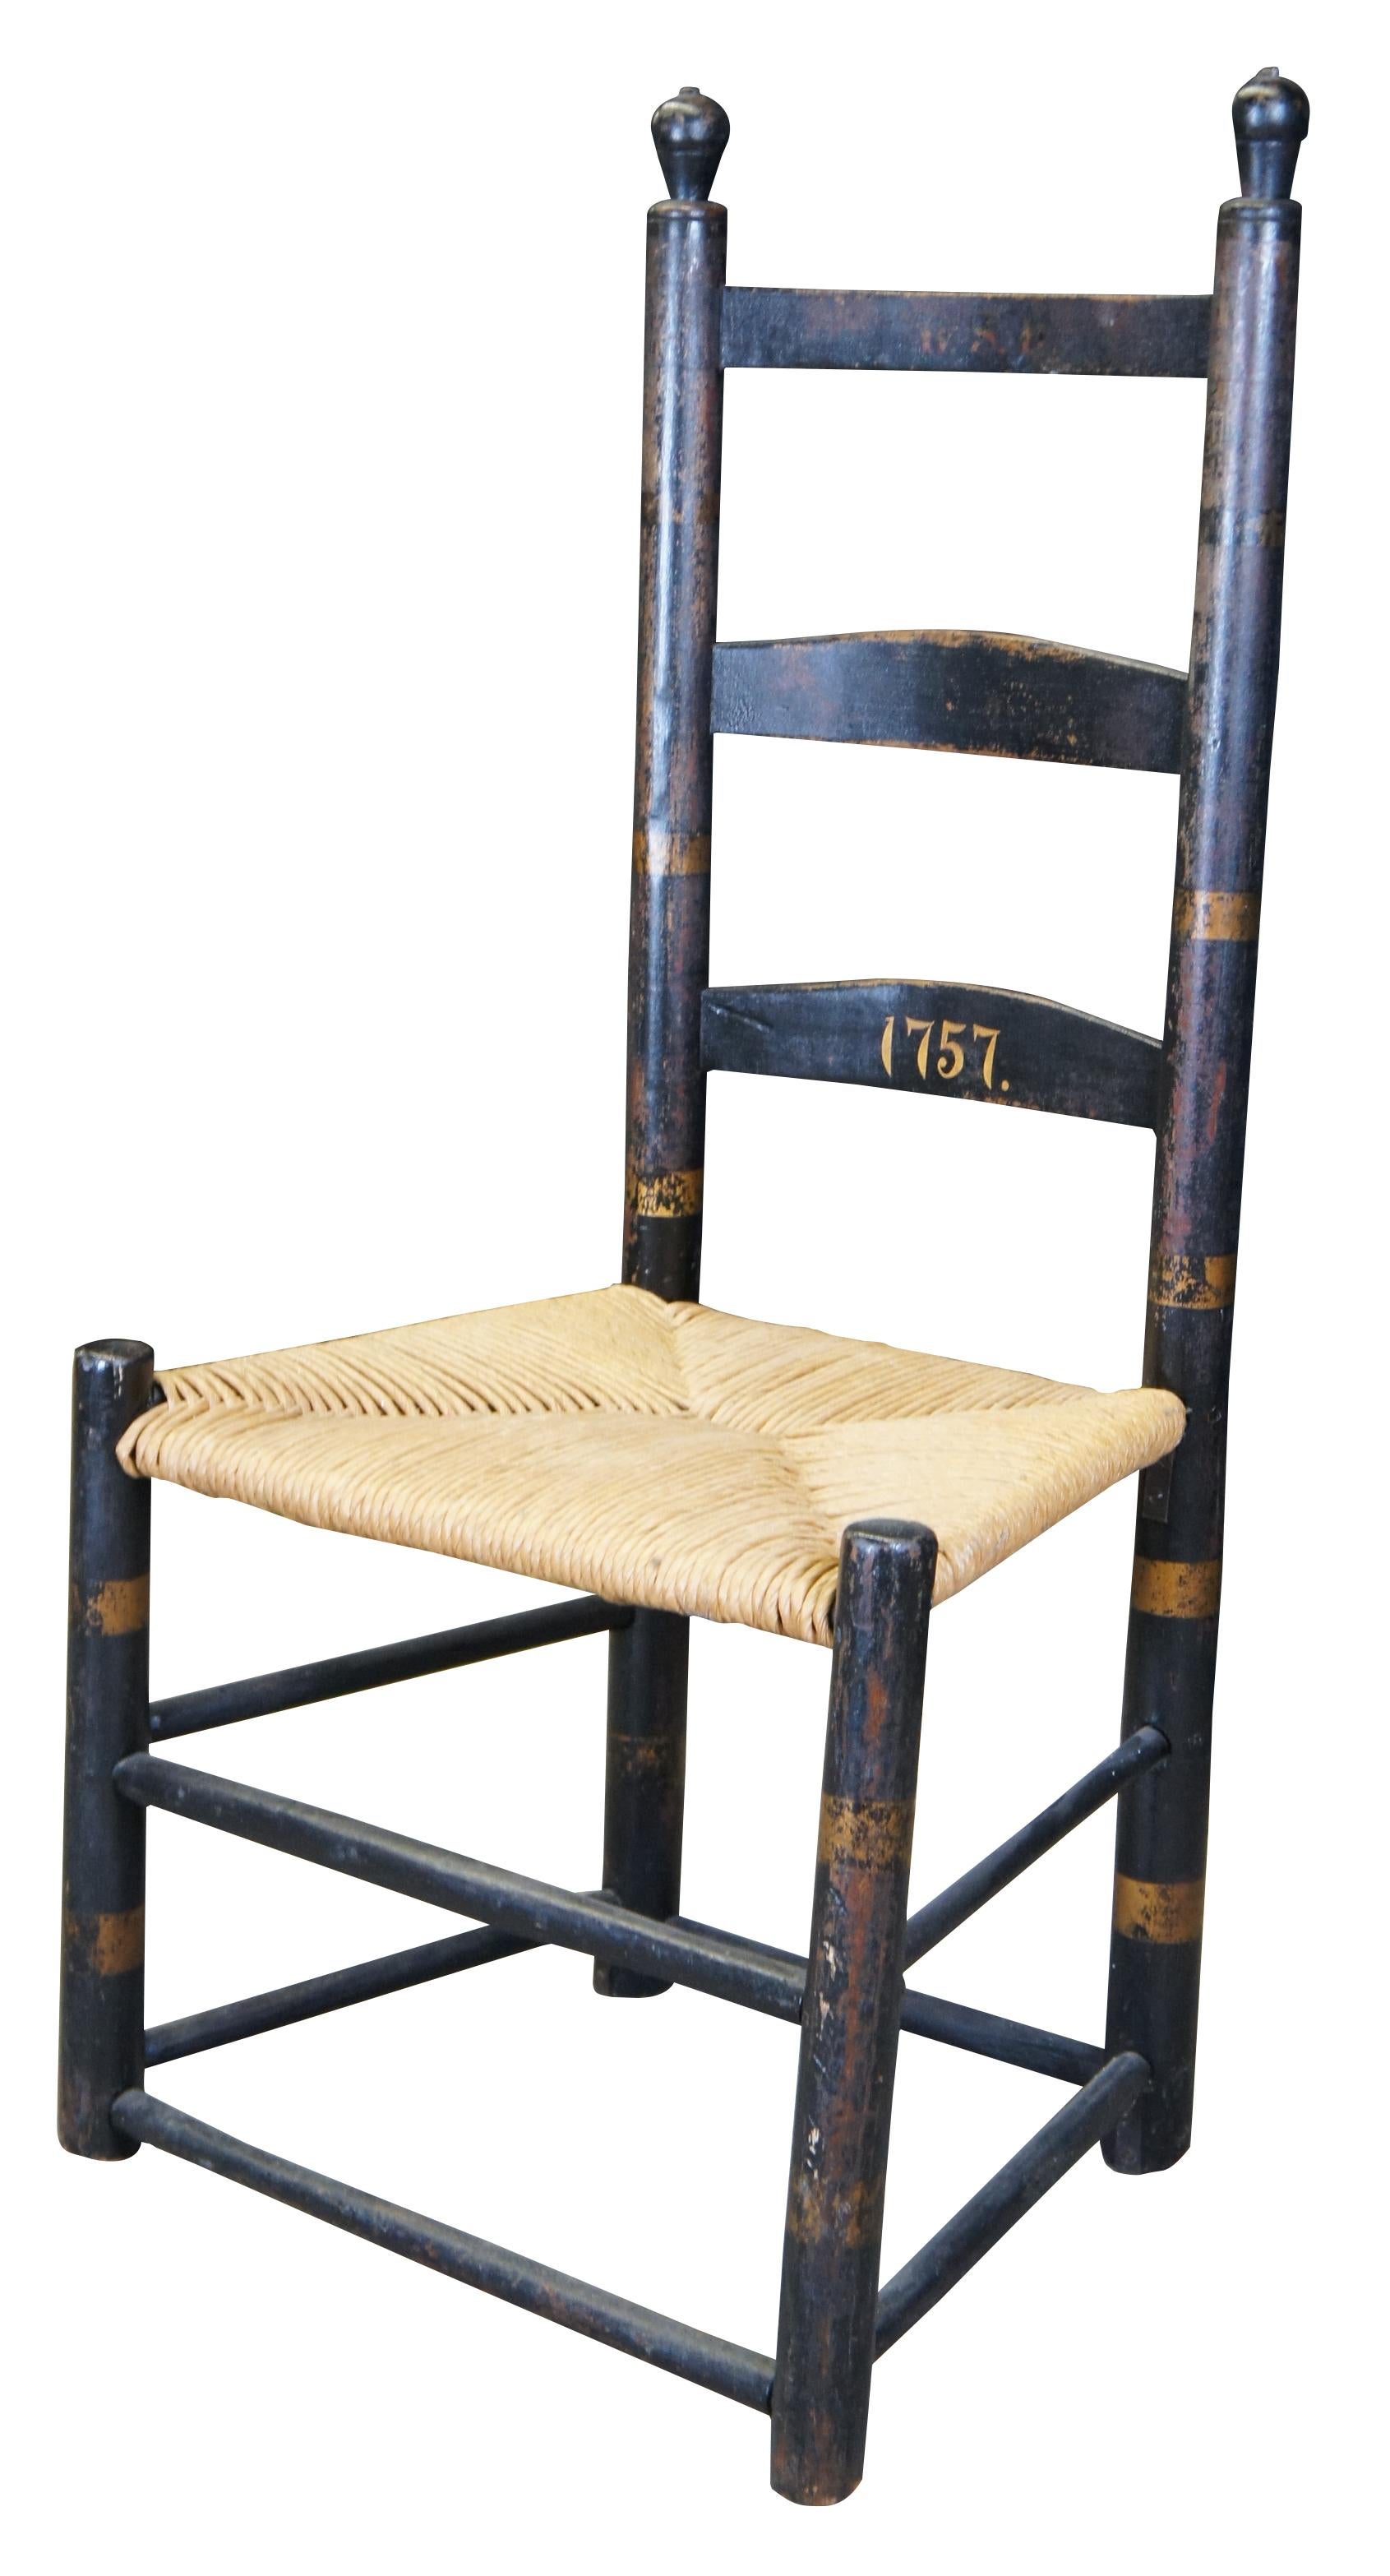 Antique mid-18th century Shaker chair featuring painted accents with ladderback and rush seat. Circa 1757, American.
 